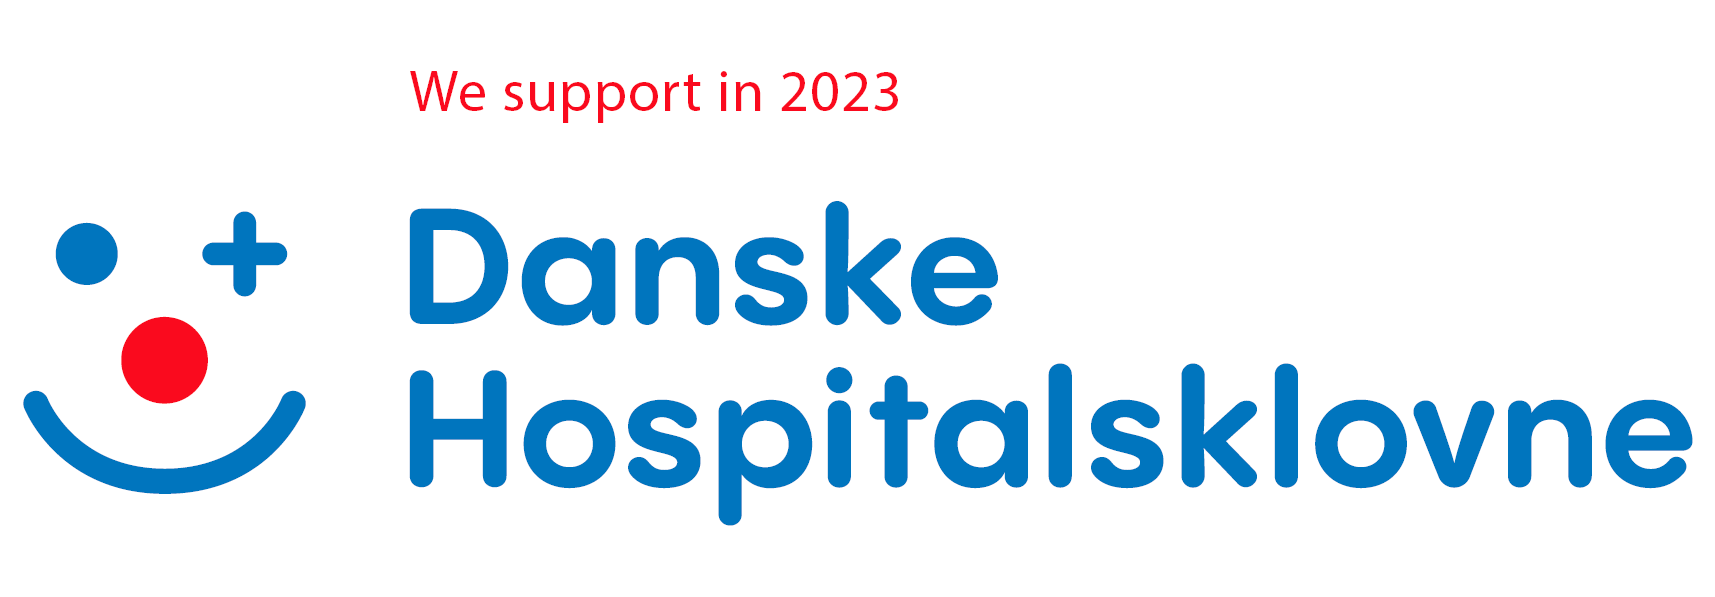 logo_80 x 30 mm_we support 2023